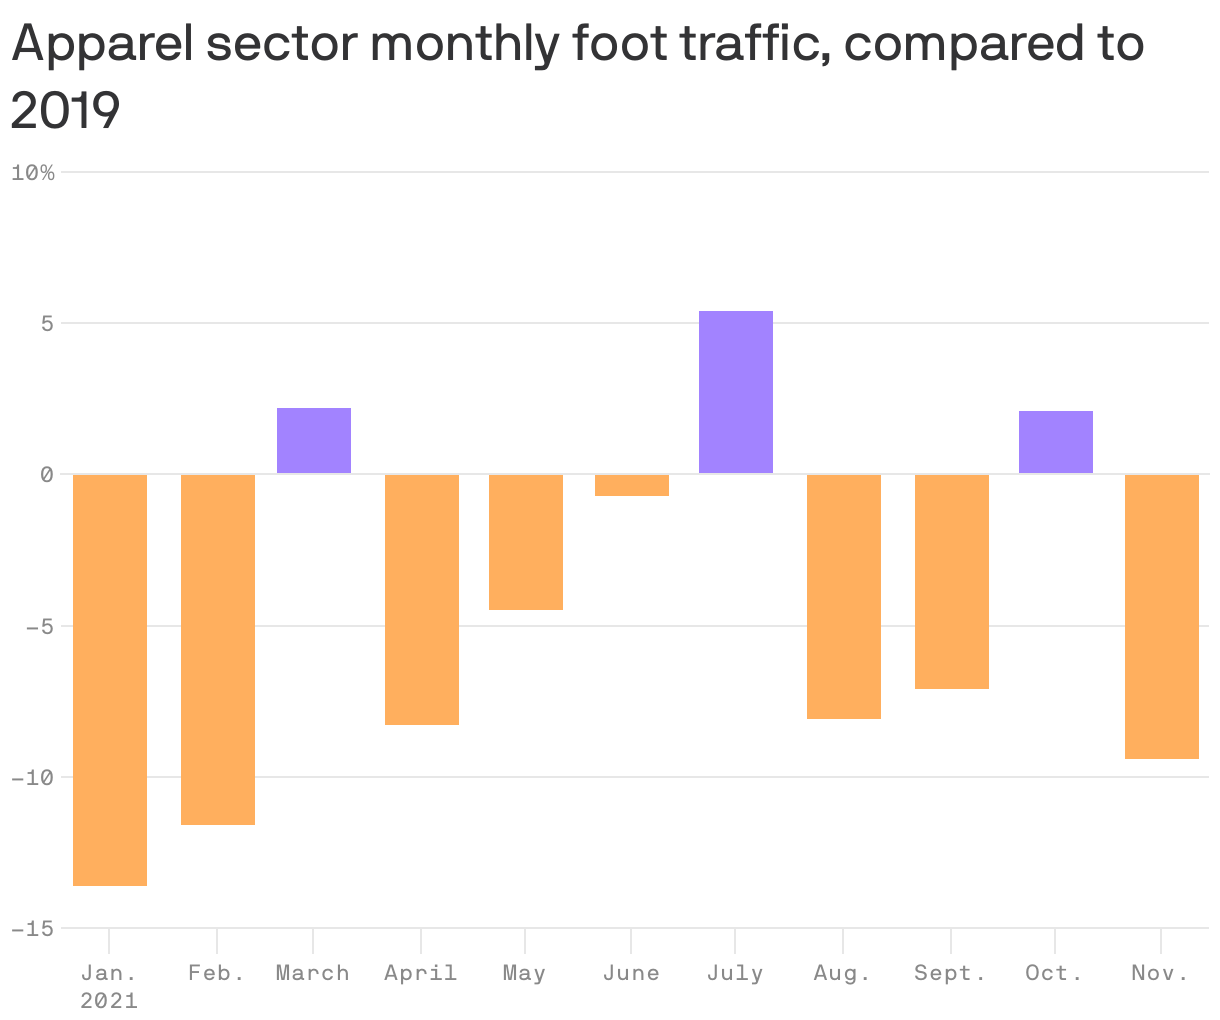 Apparel sector monthly foot traffic, compared to 2019